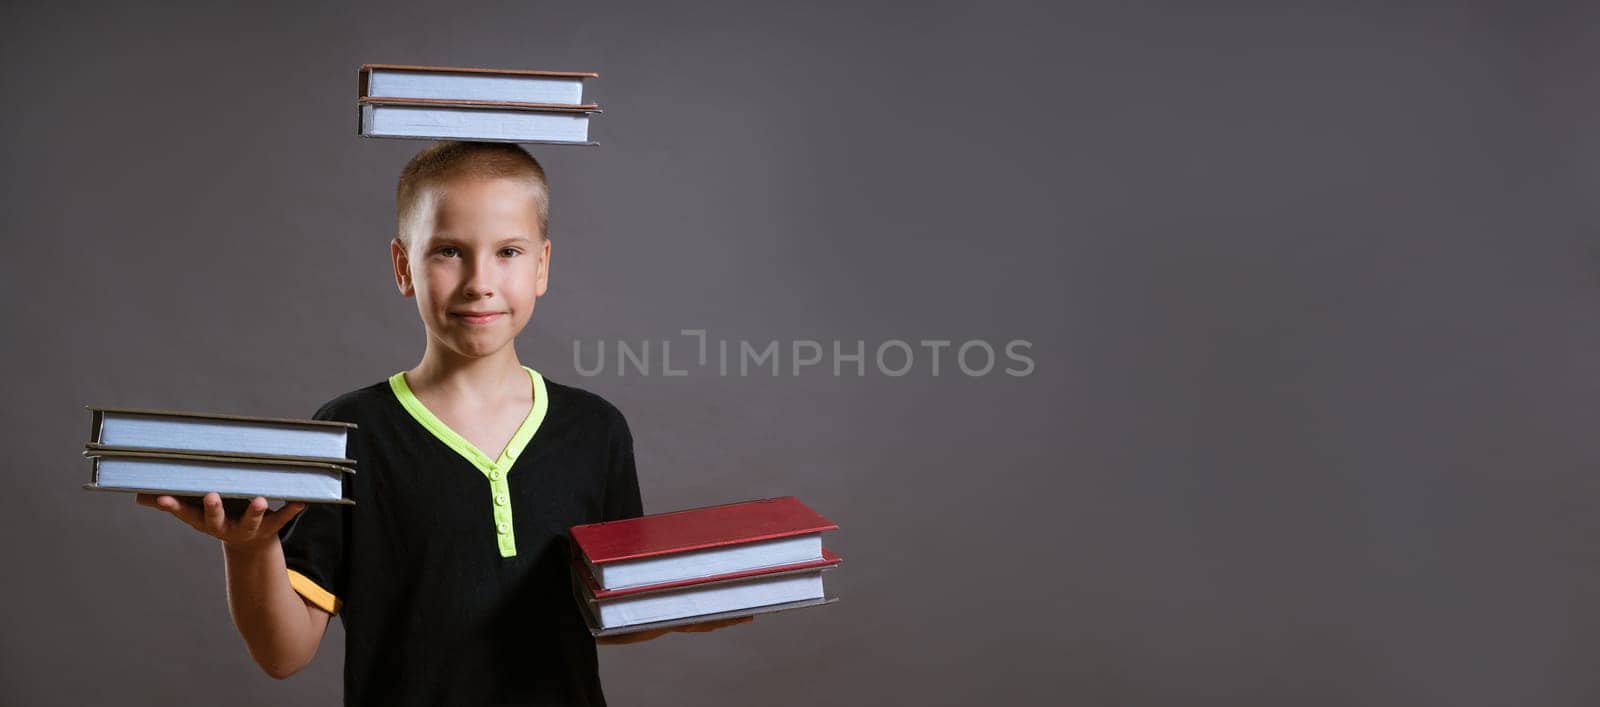 little boy hold the stacks of books in your hands and on your head by EkaterinaPereslavtseva